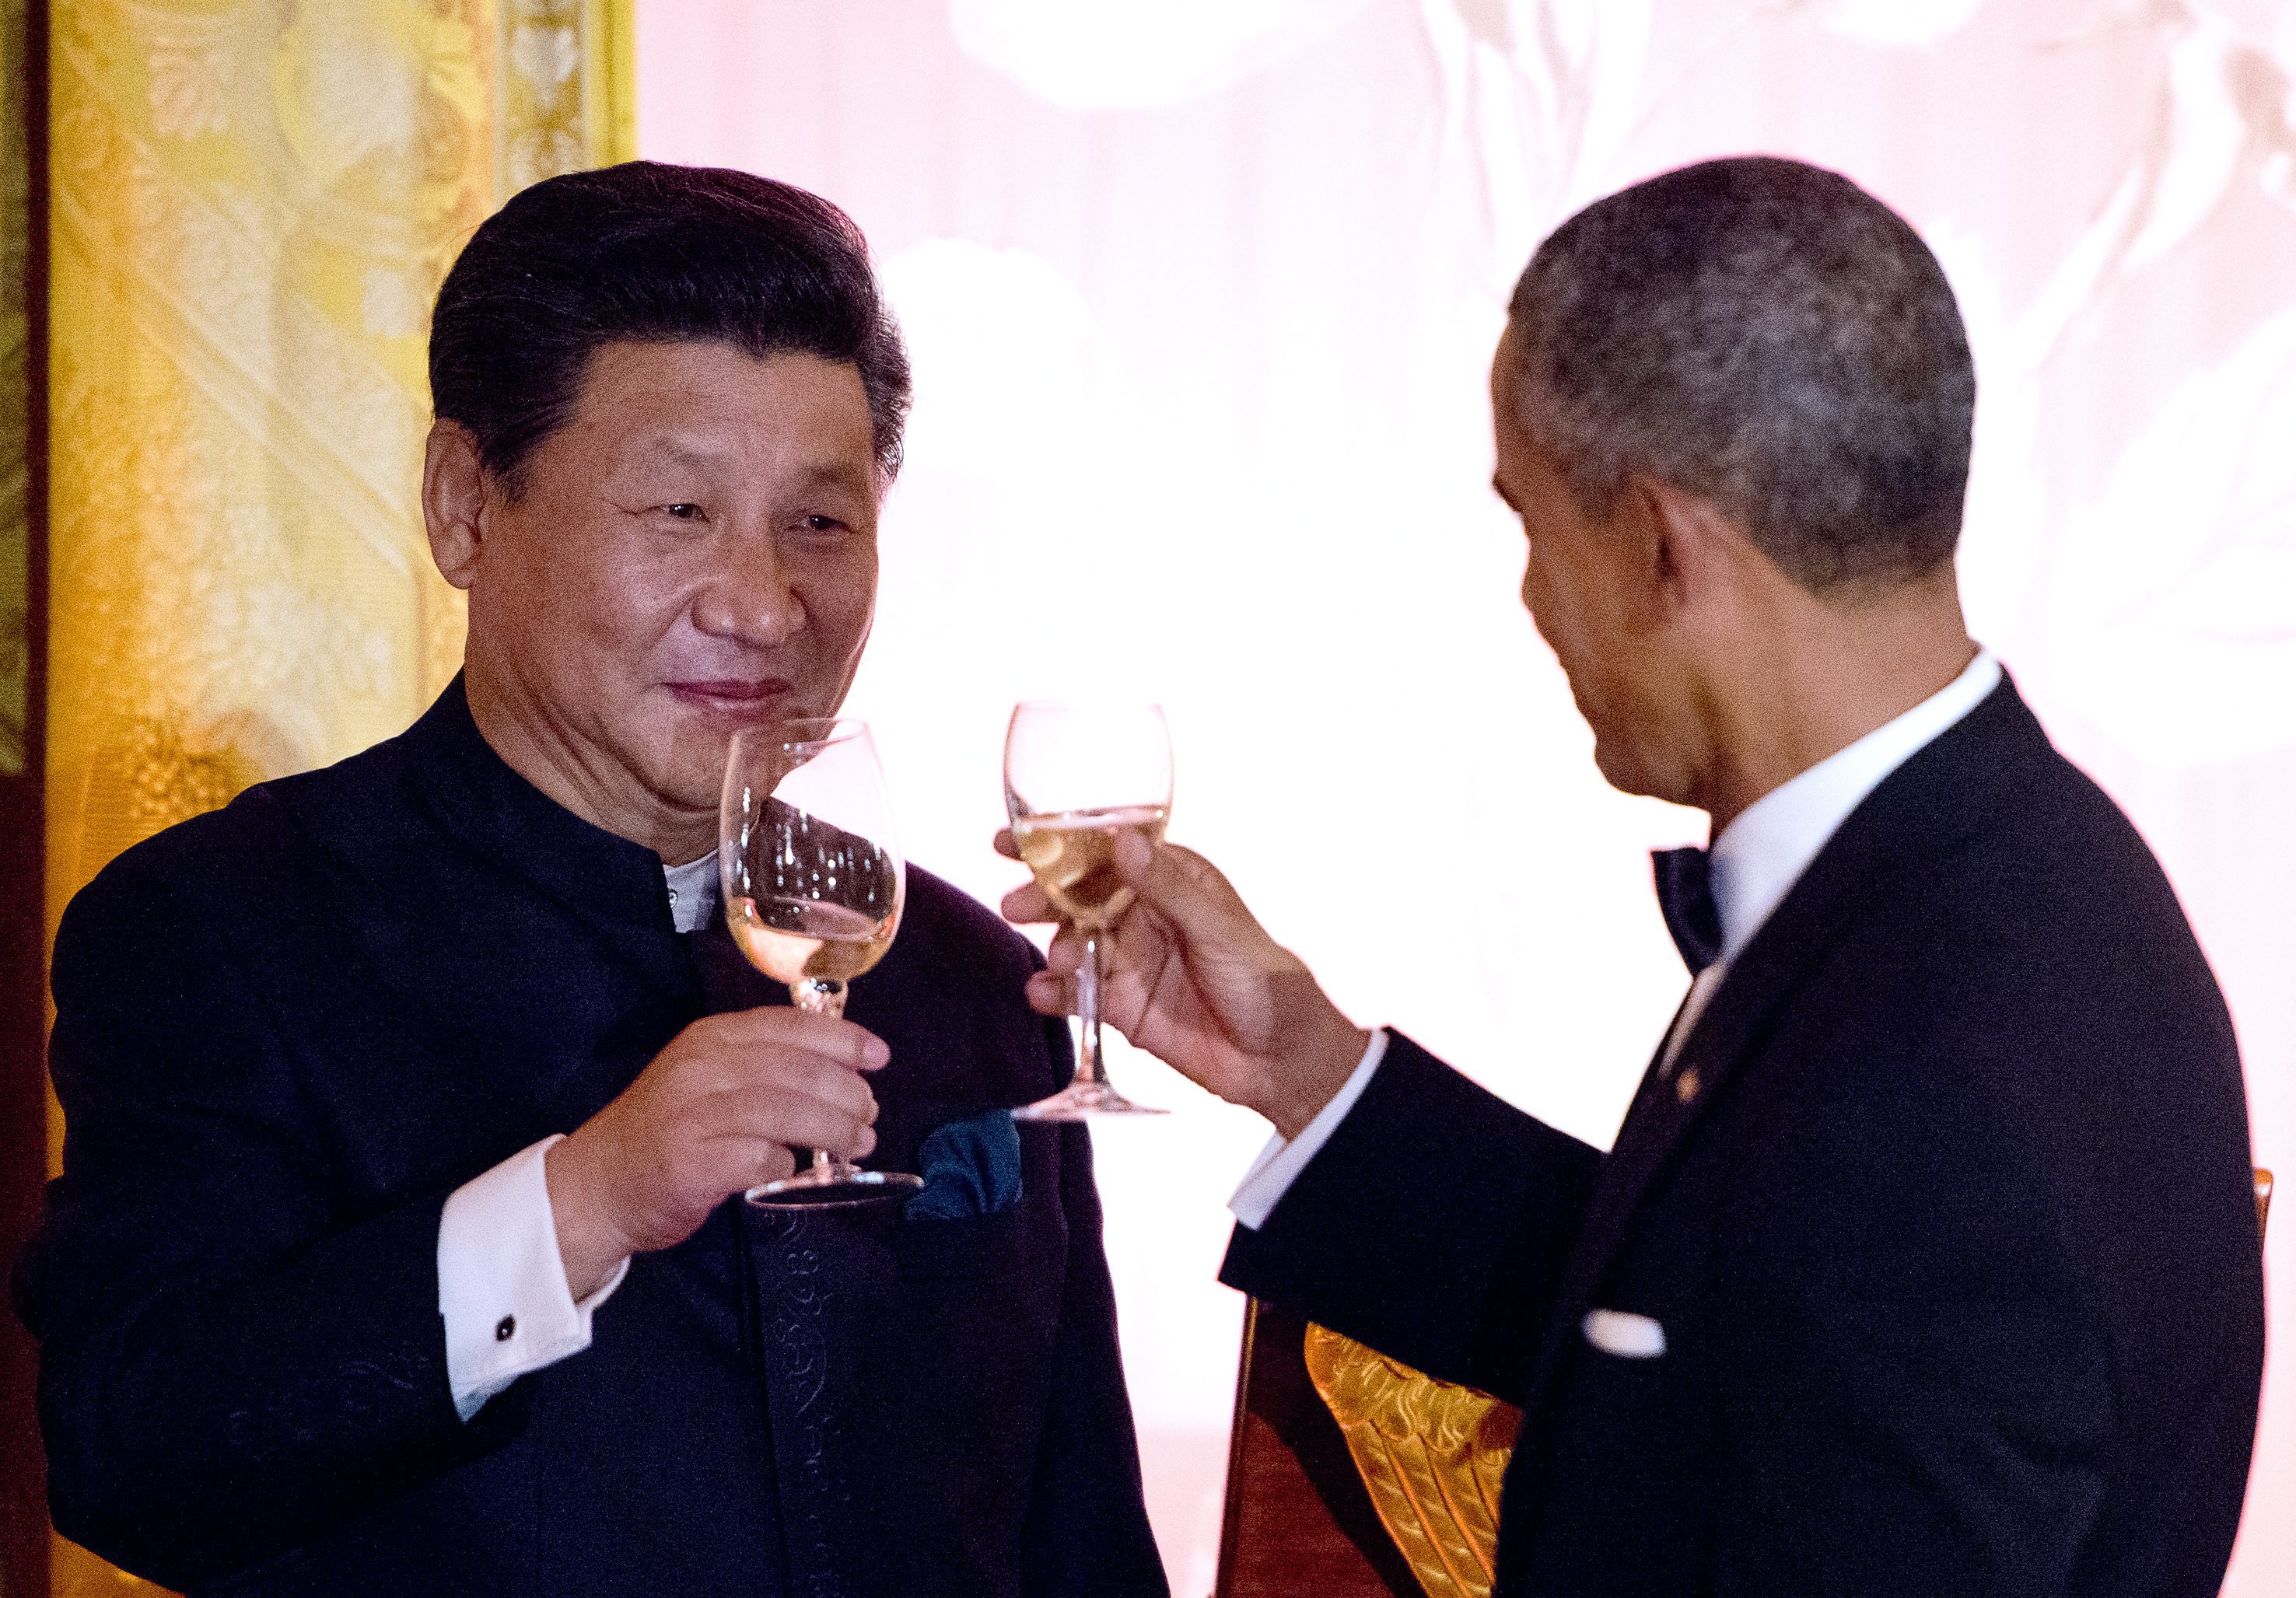 epa04949953 US President Barack Obama (R) and Chinese President Xi Jinping (L) exchange toasts during a State Dinner in the East Room of the White House in Washington, DC, USA, 25 September 2015. Xi is in the USA on a weeklong official visit. EPA/RON SACHS/POOL BEST QUALITY AVAILABLE